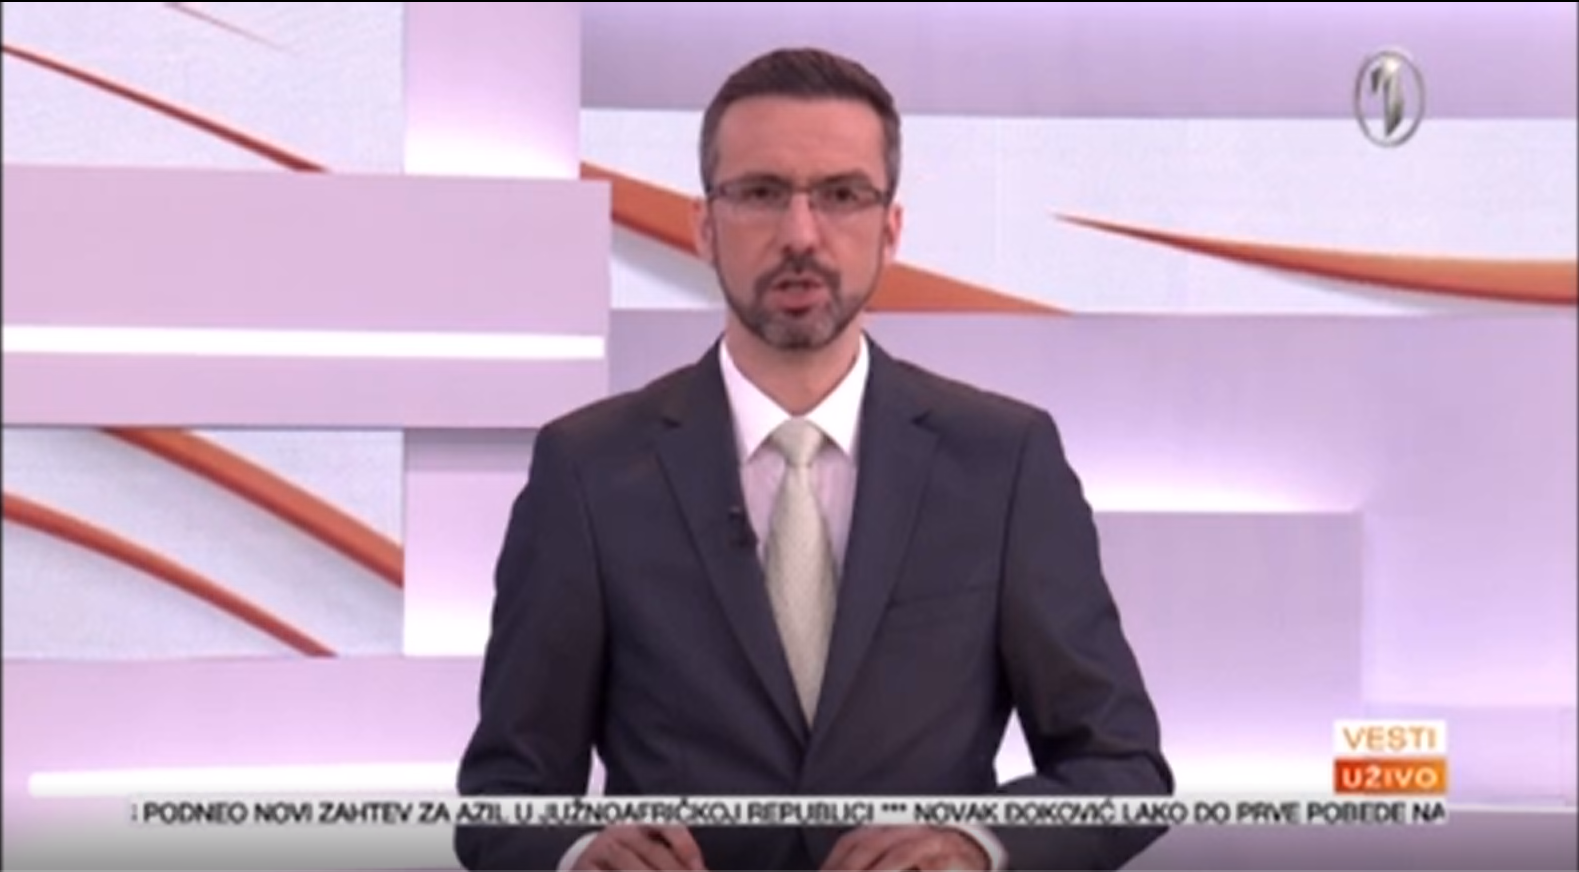  Statement of SMAC Director for the First Serbian Television regarding Demining Project of the 